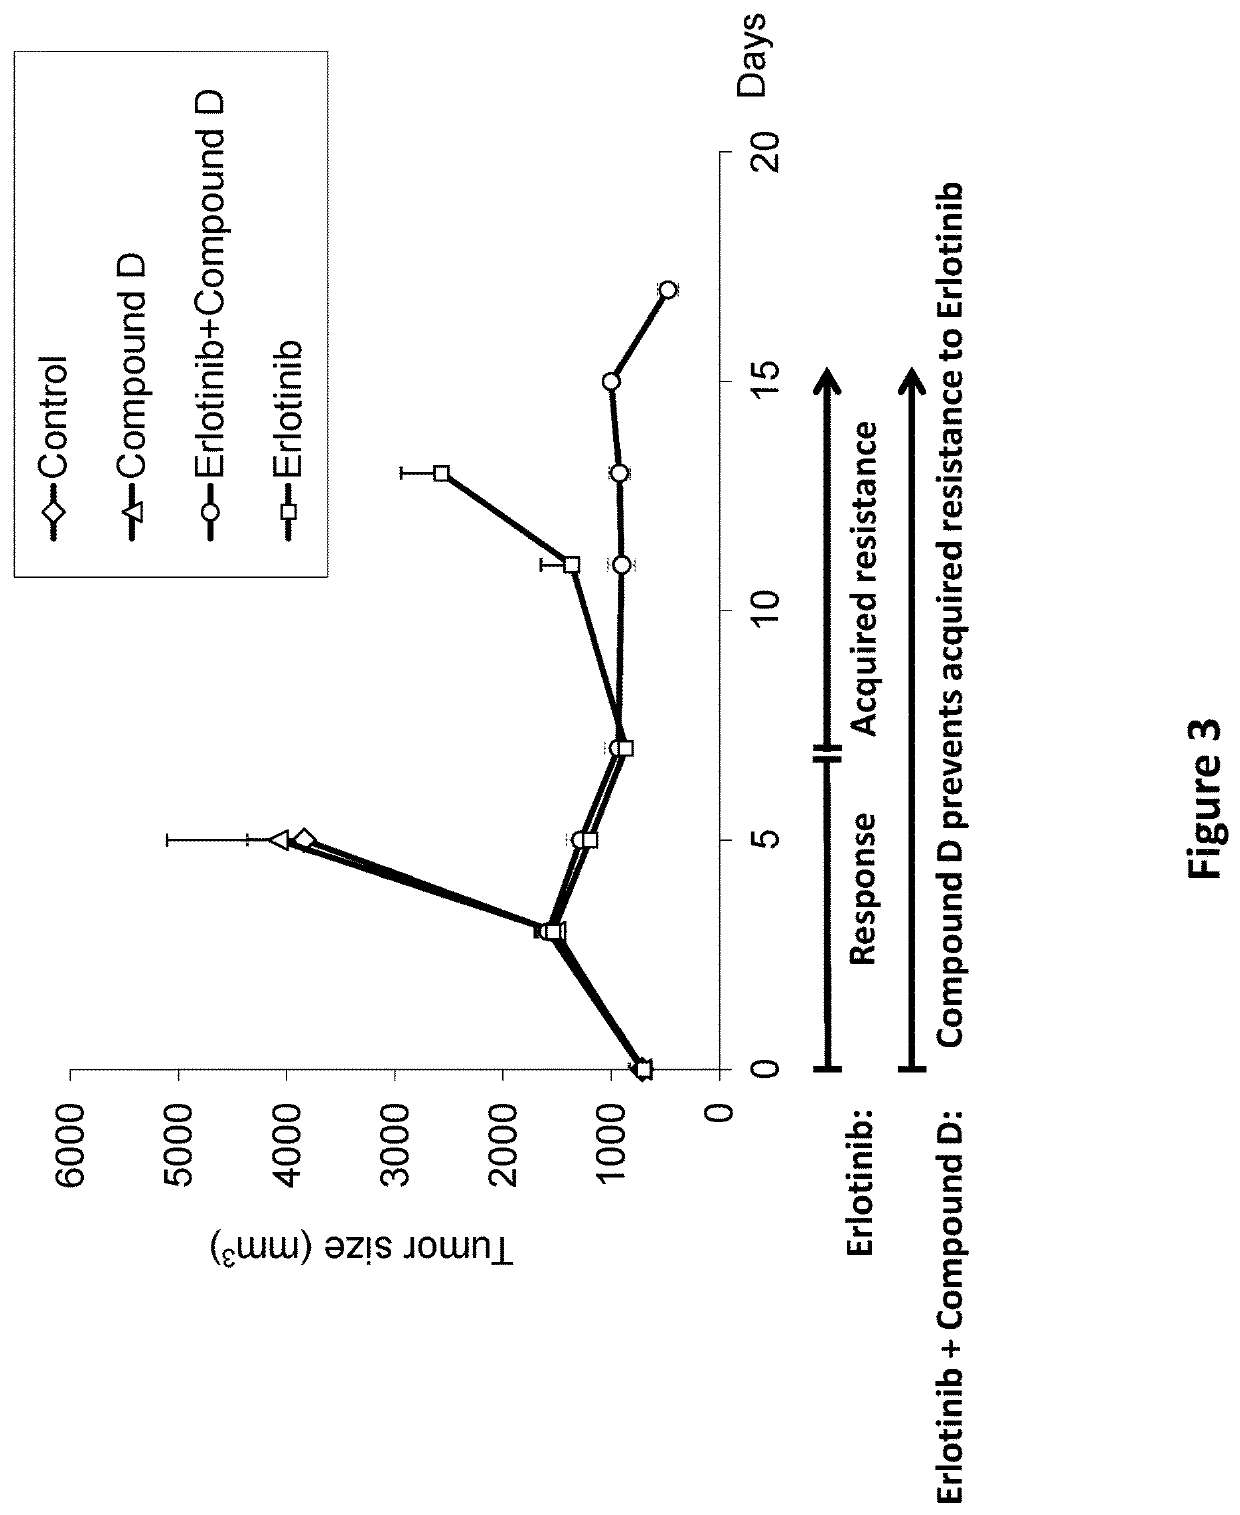 Combinations of IRS/Stat3 dual modulators and anti-cancer agents for treating cancer